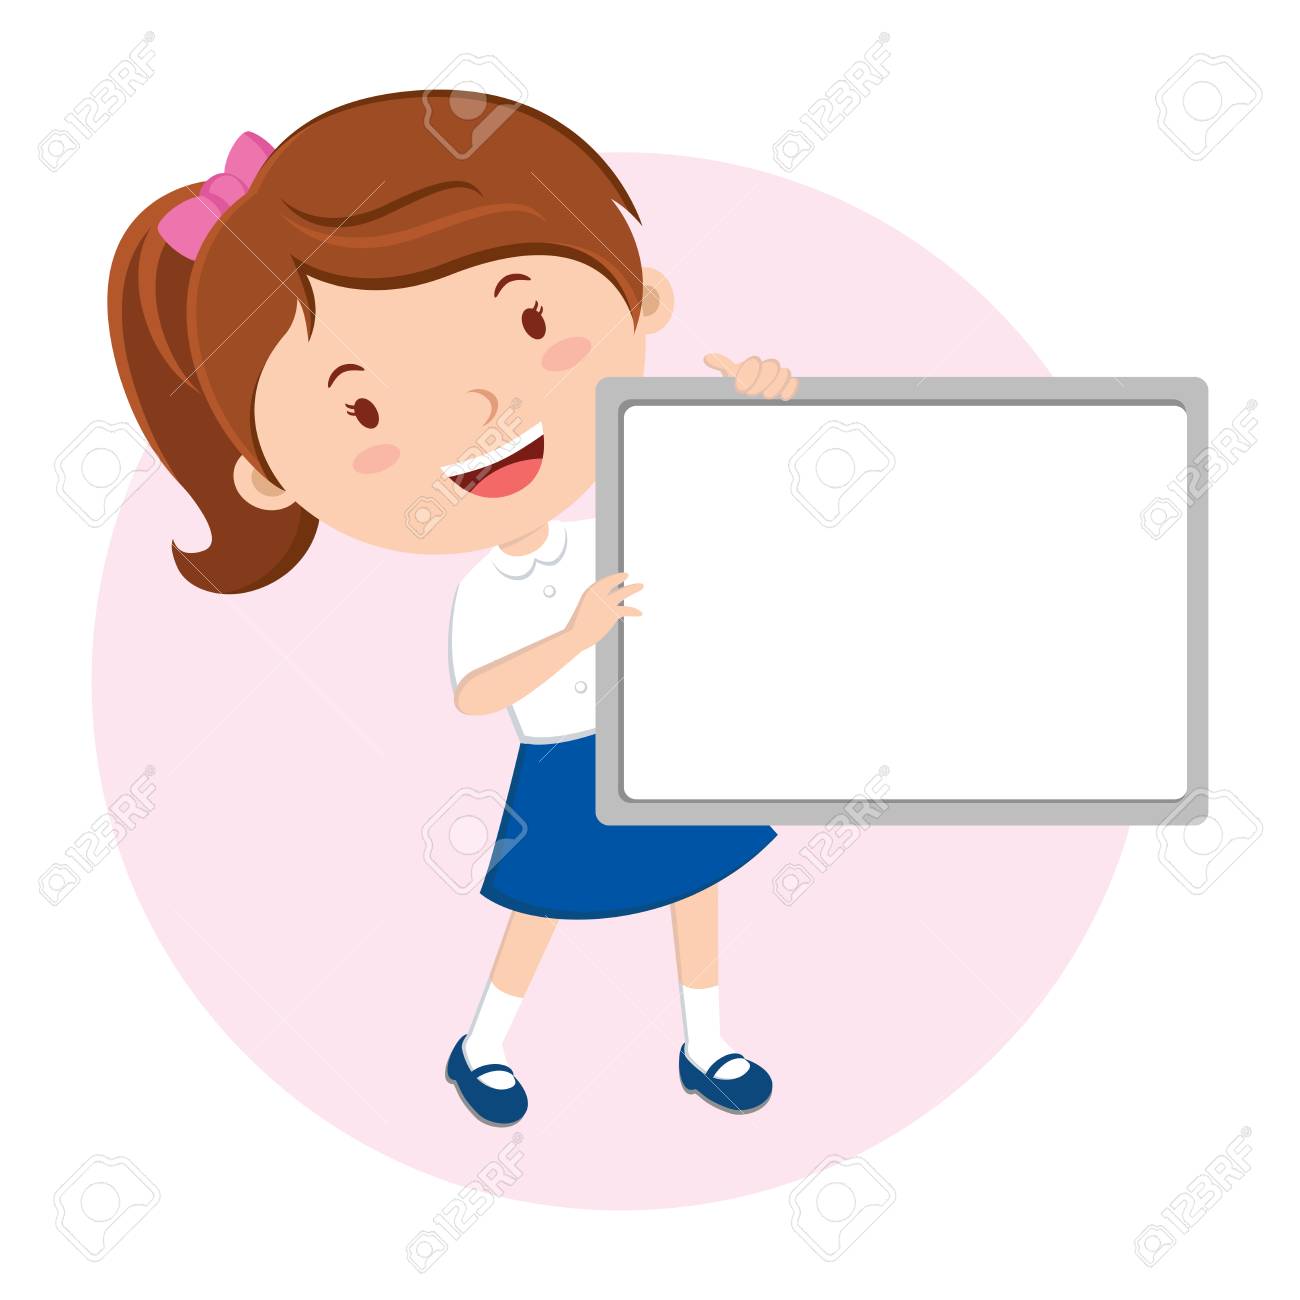 whiteboard clipart student